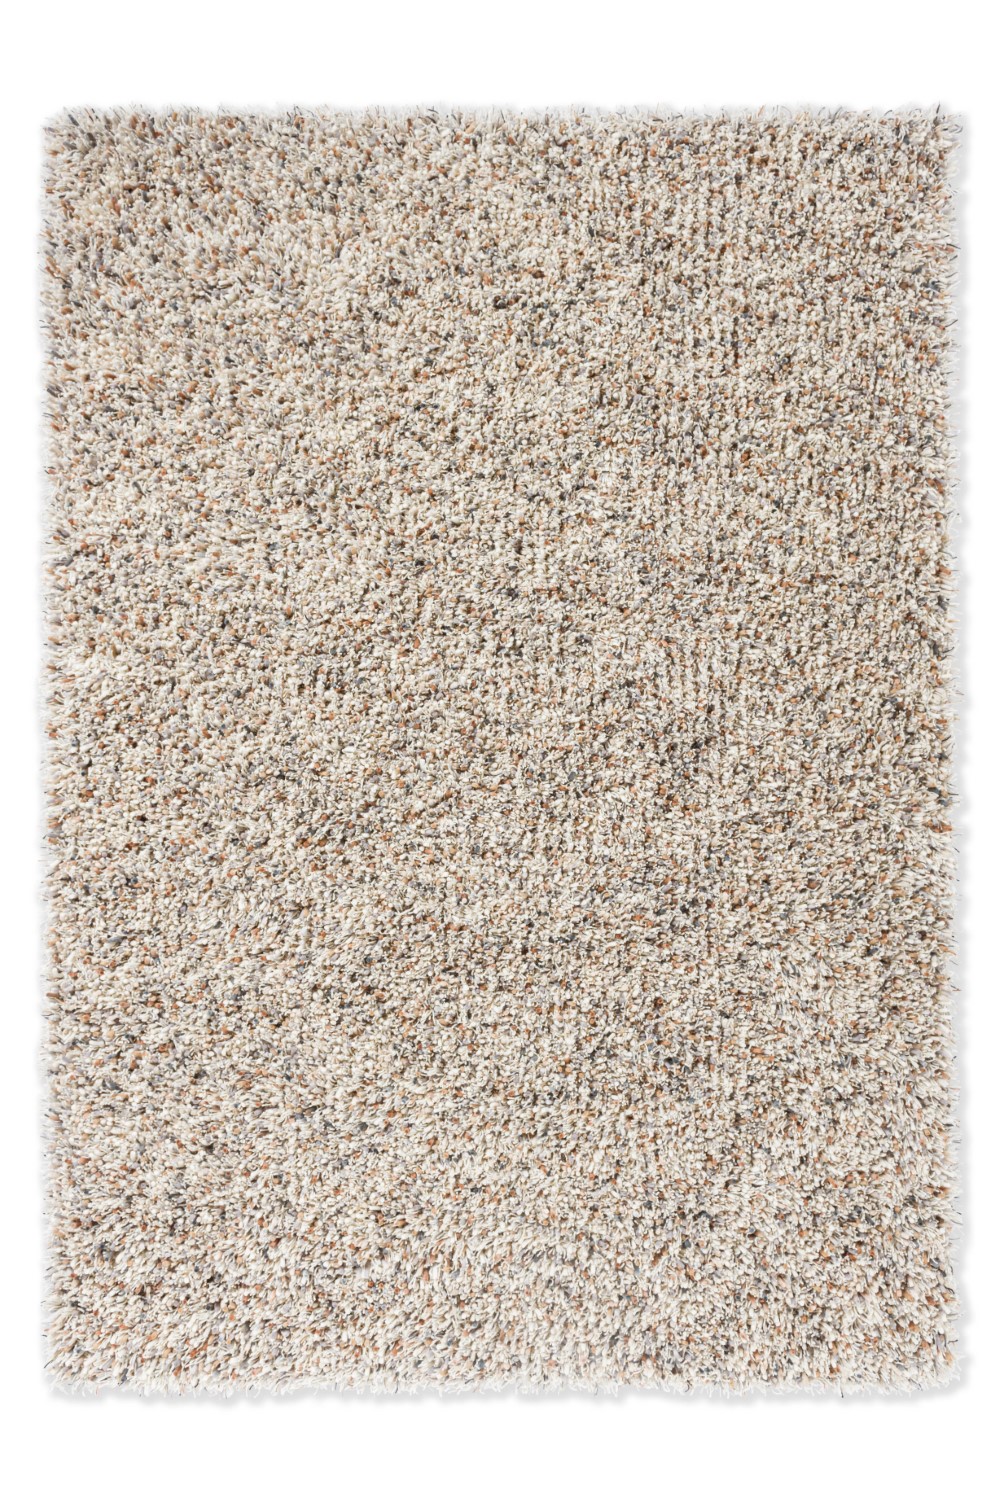 brink-campman-rug-spring-down-to-earth-059111